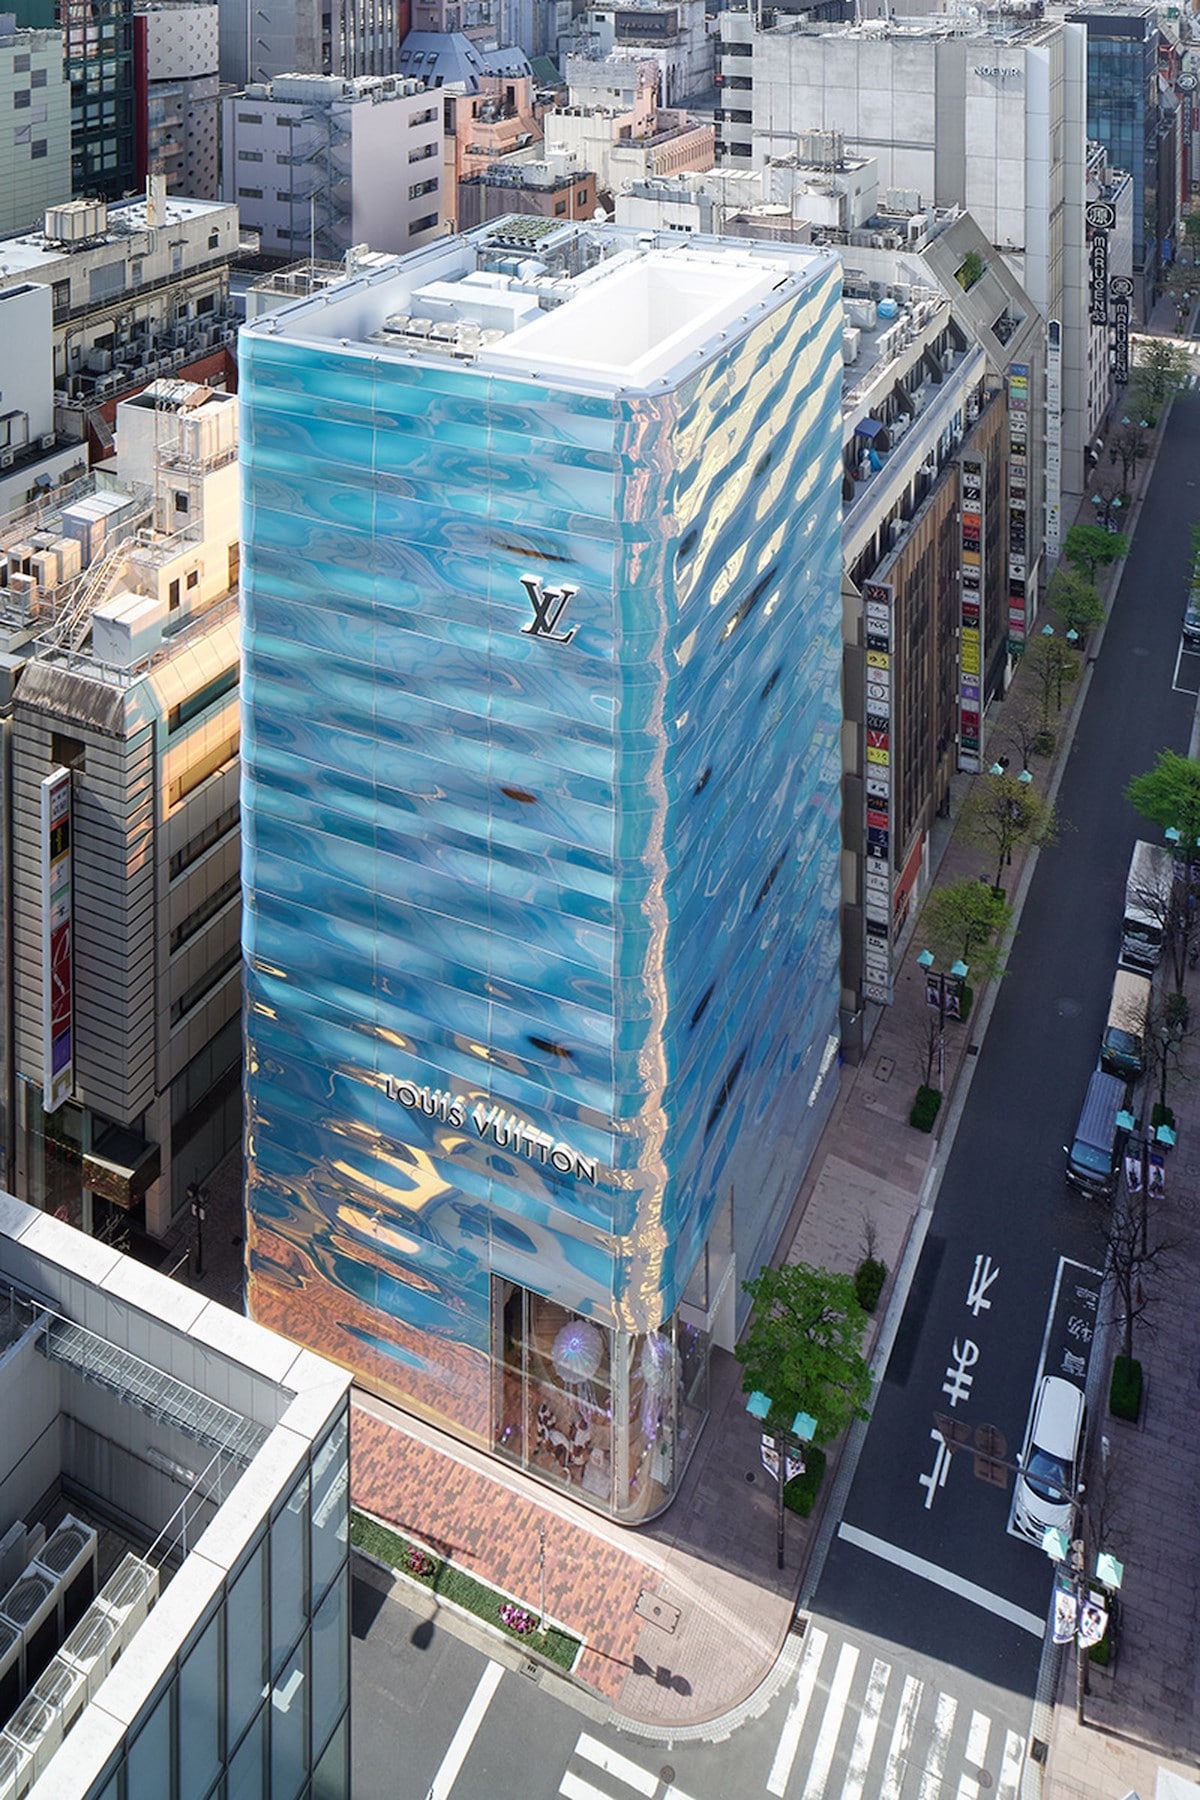 Louis Vuitton’s Ginza Namiki Store Reopens With Shimmering Sea-Inspired Façade